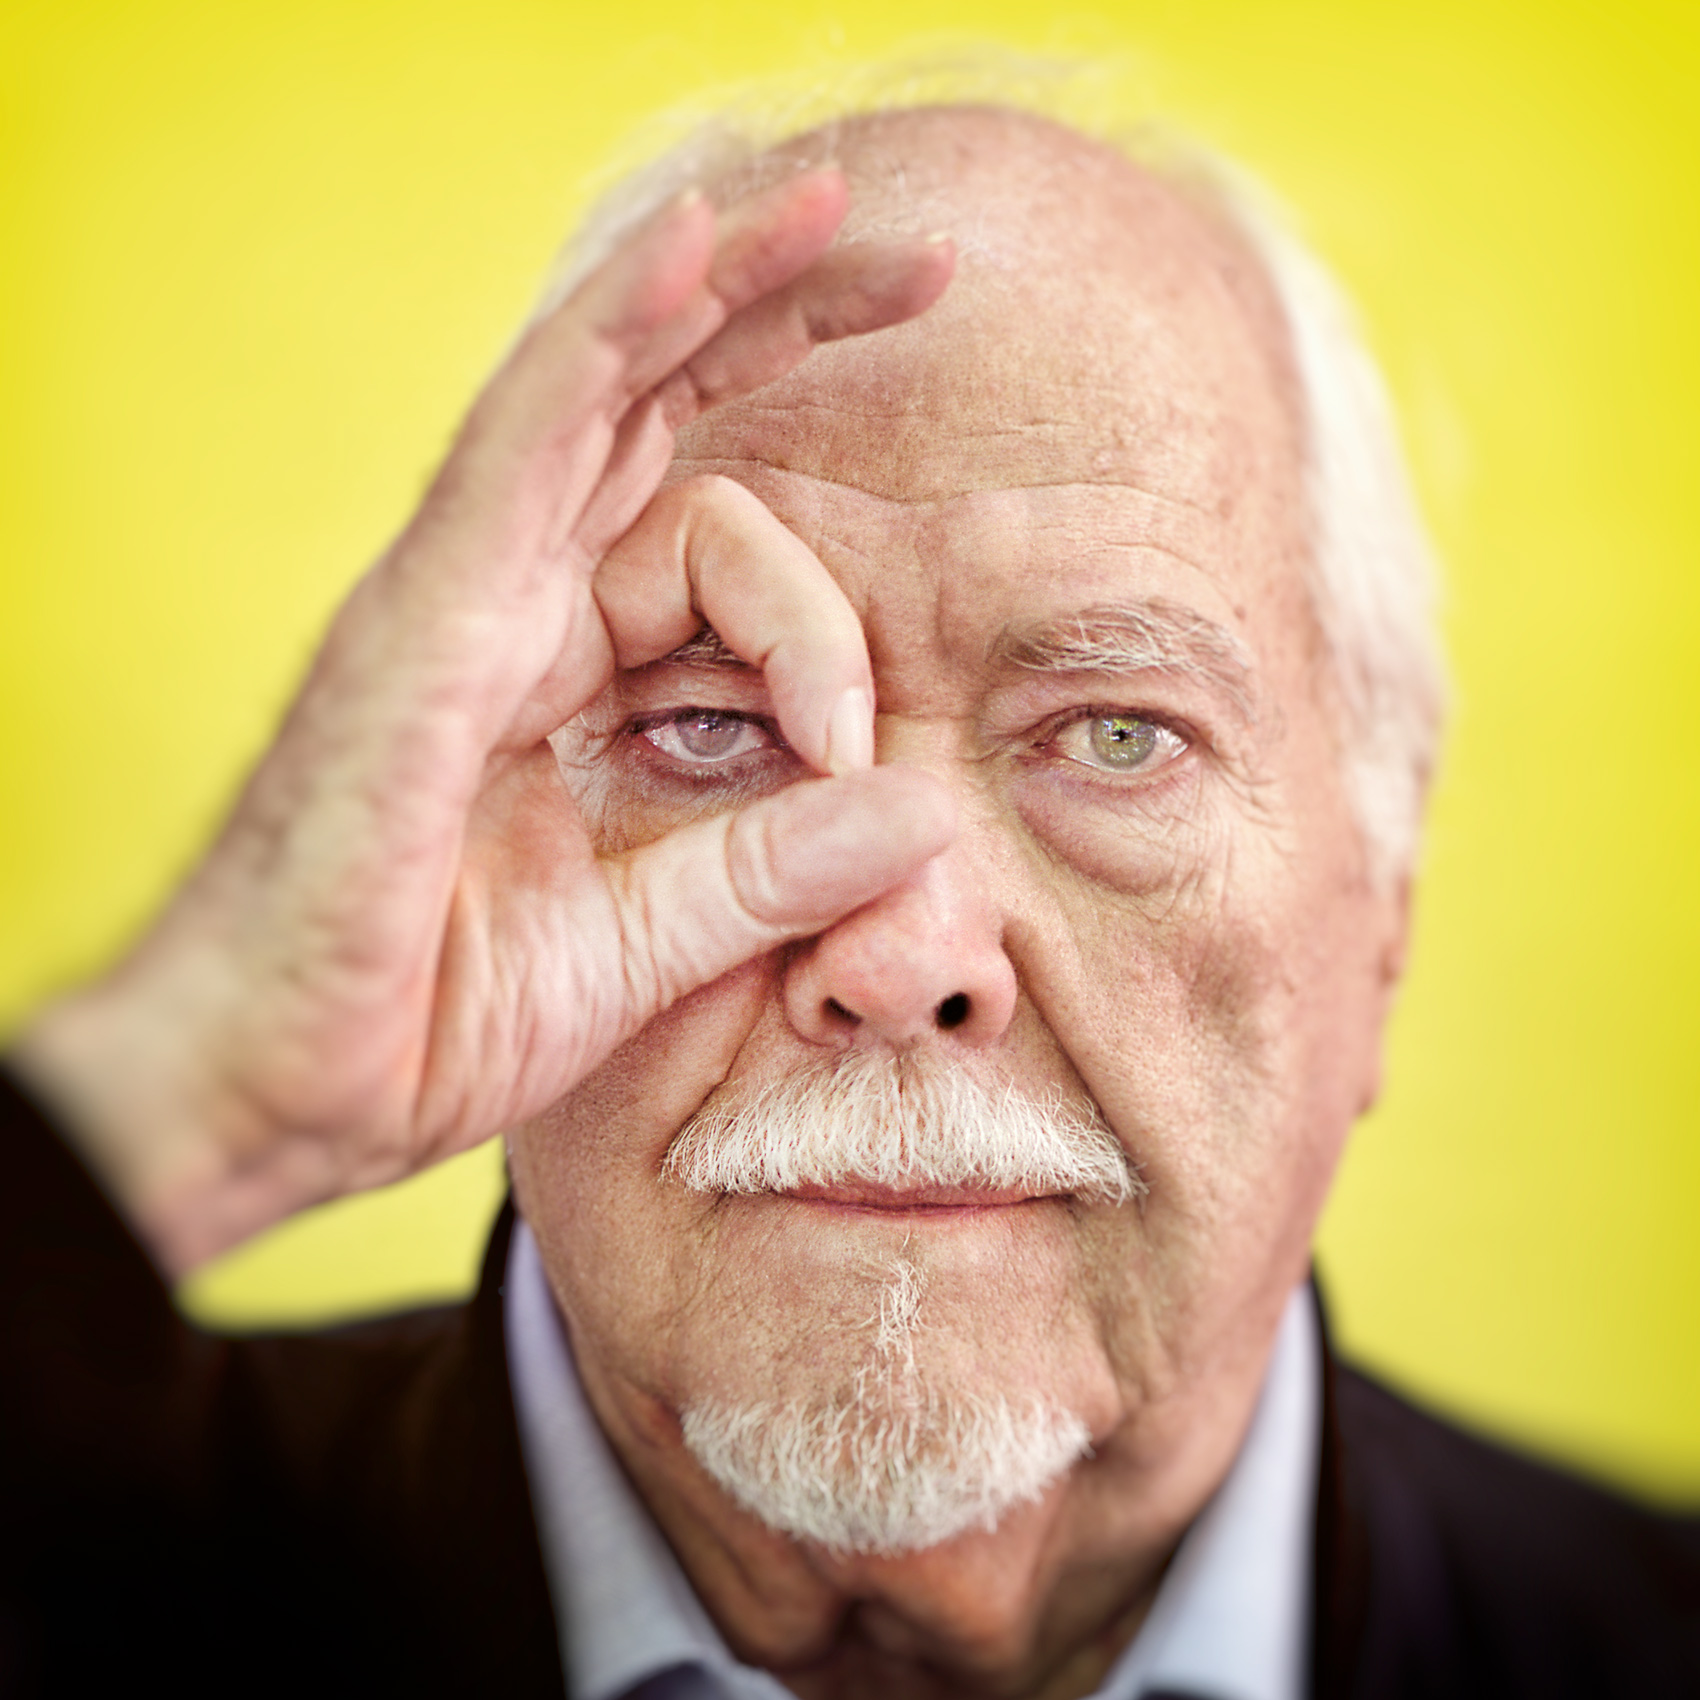 film director robert altman holds his hand over his eye during a photo at the toronto film festival